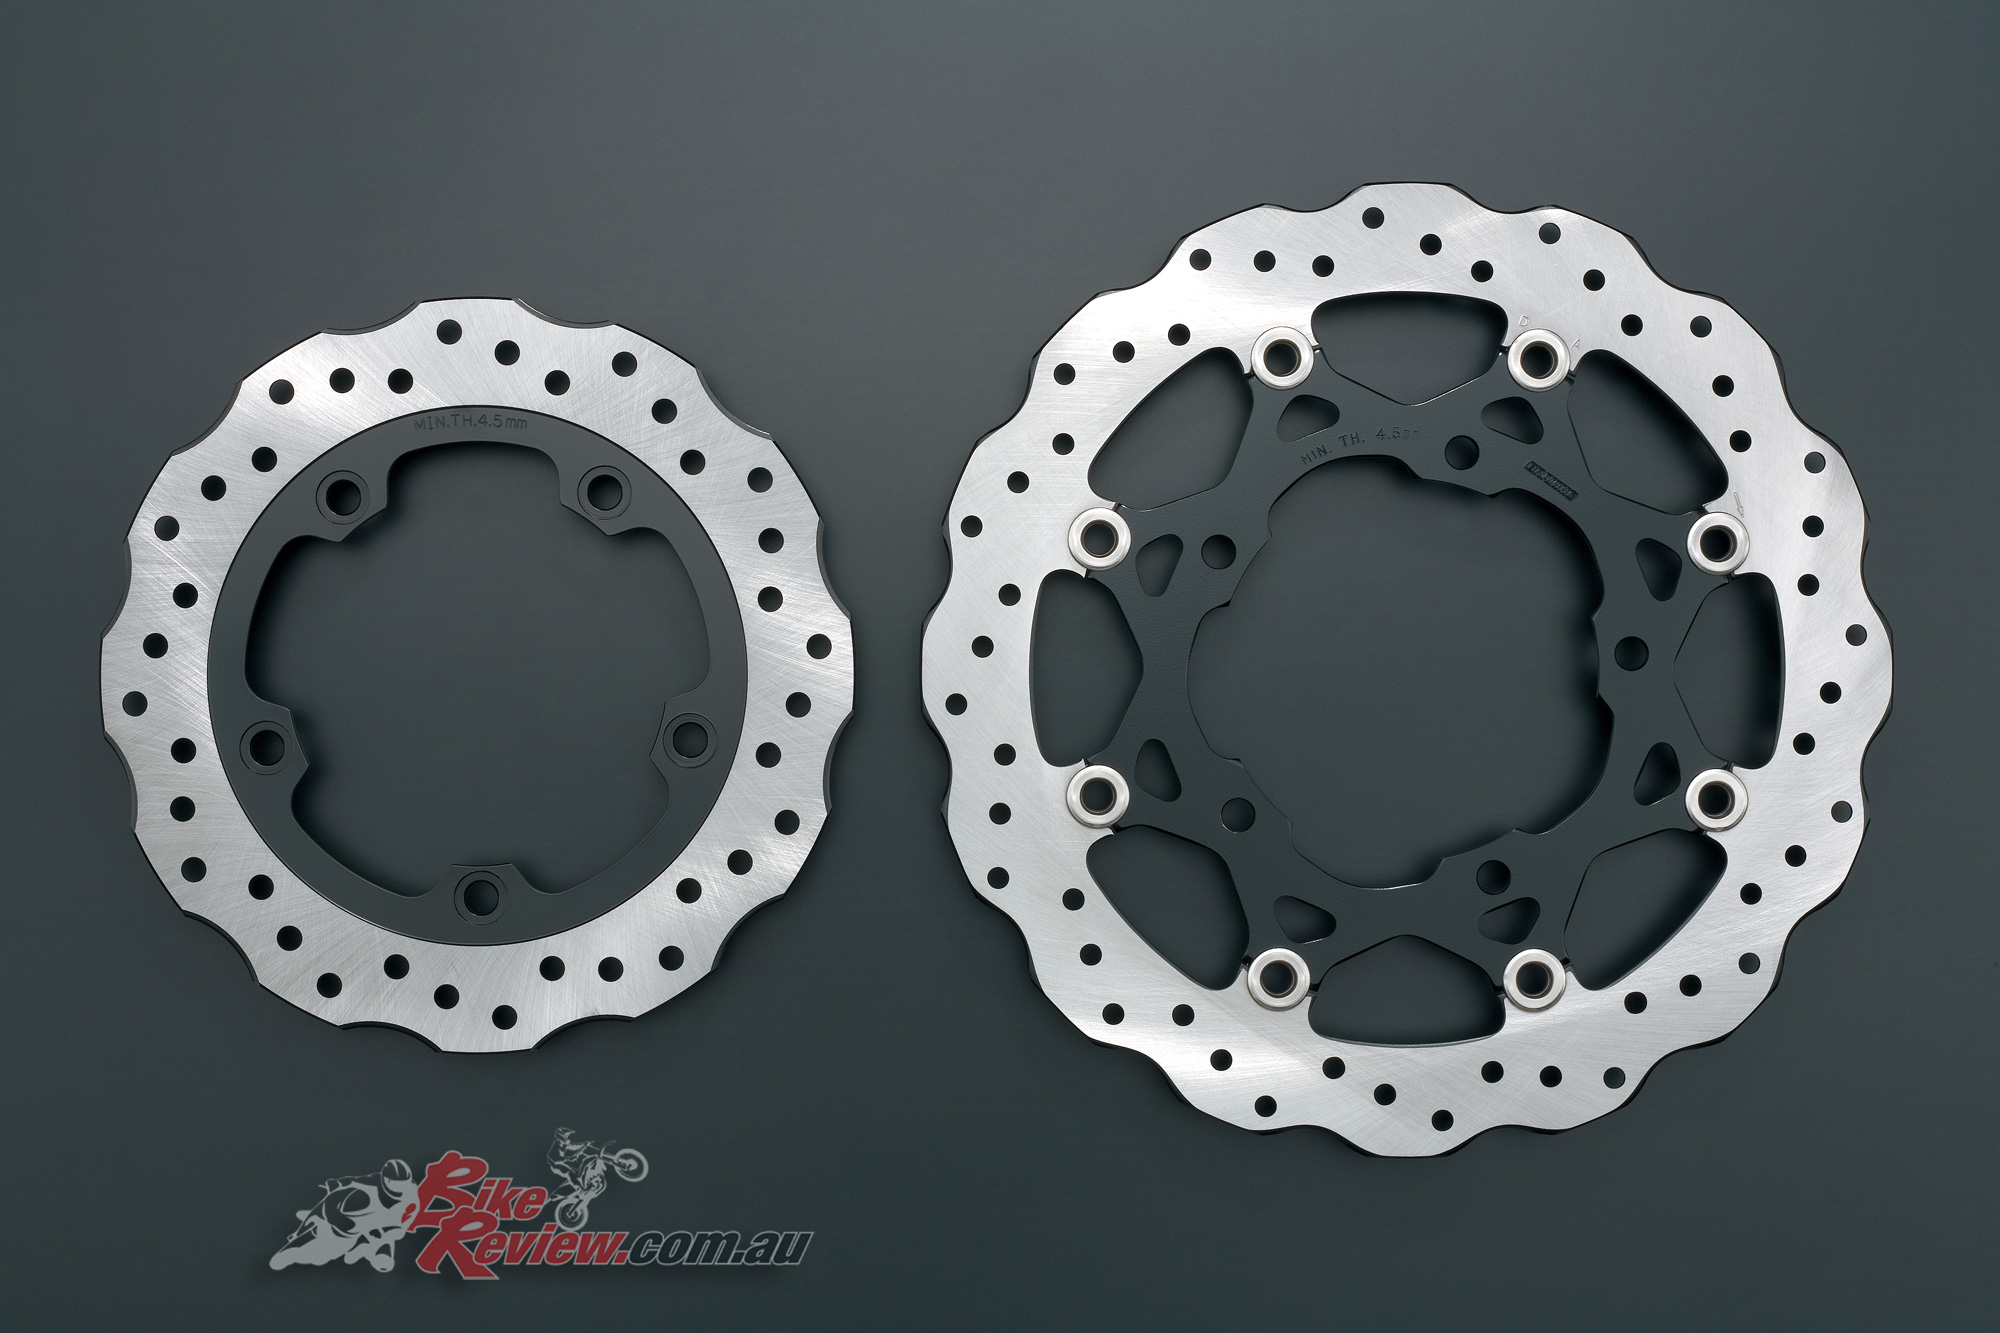 Petal rotors also look the business